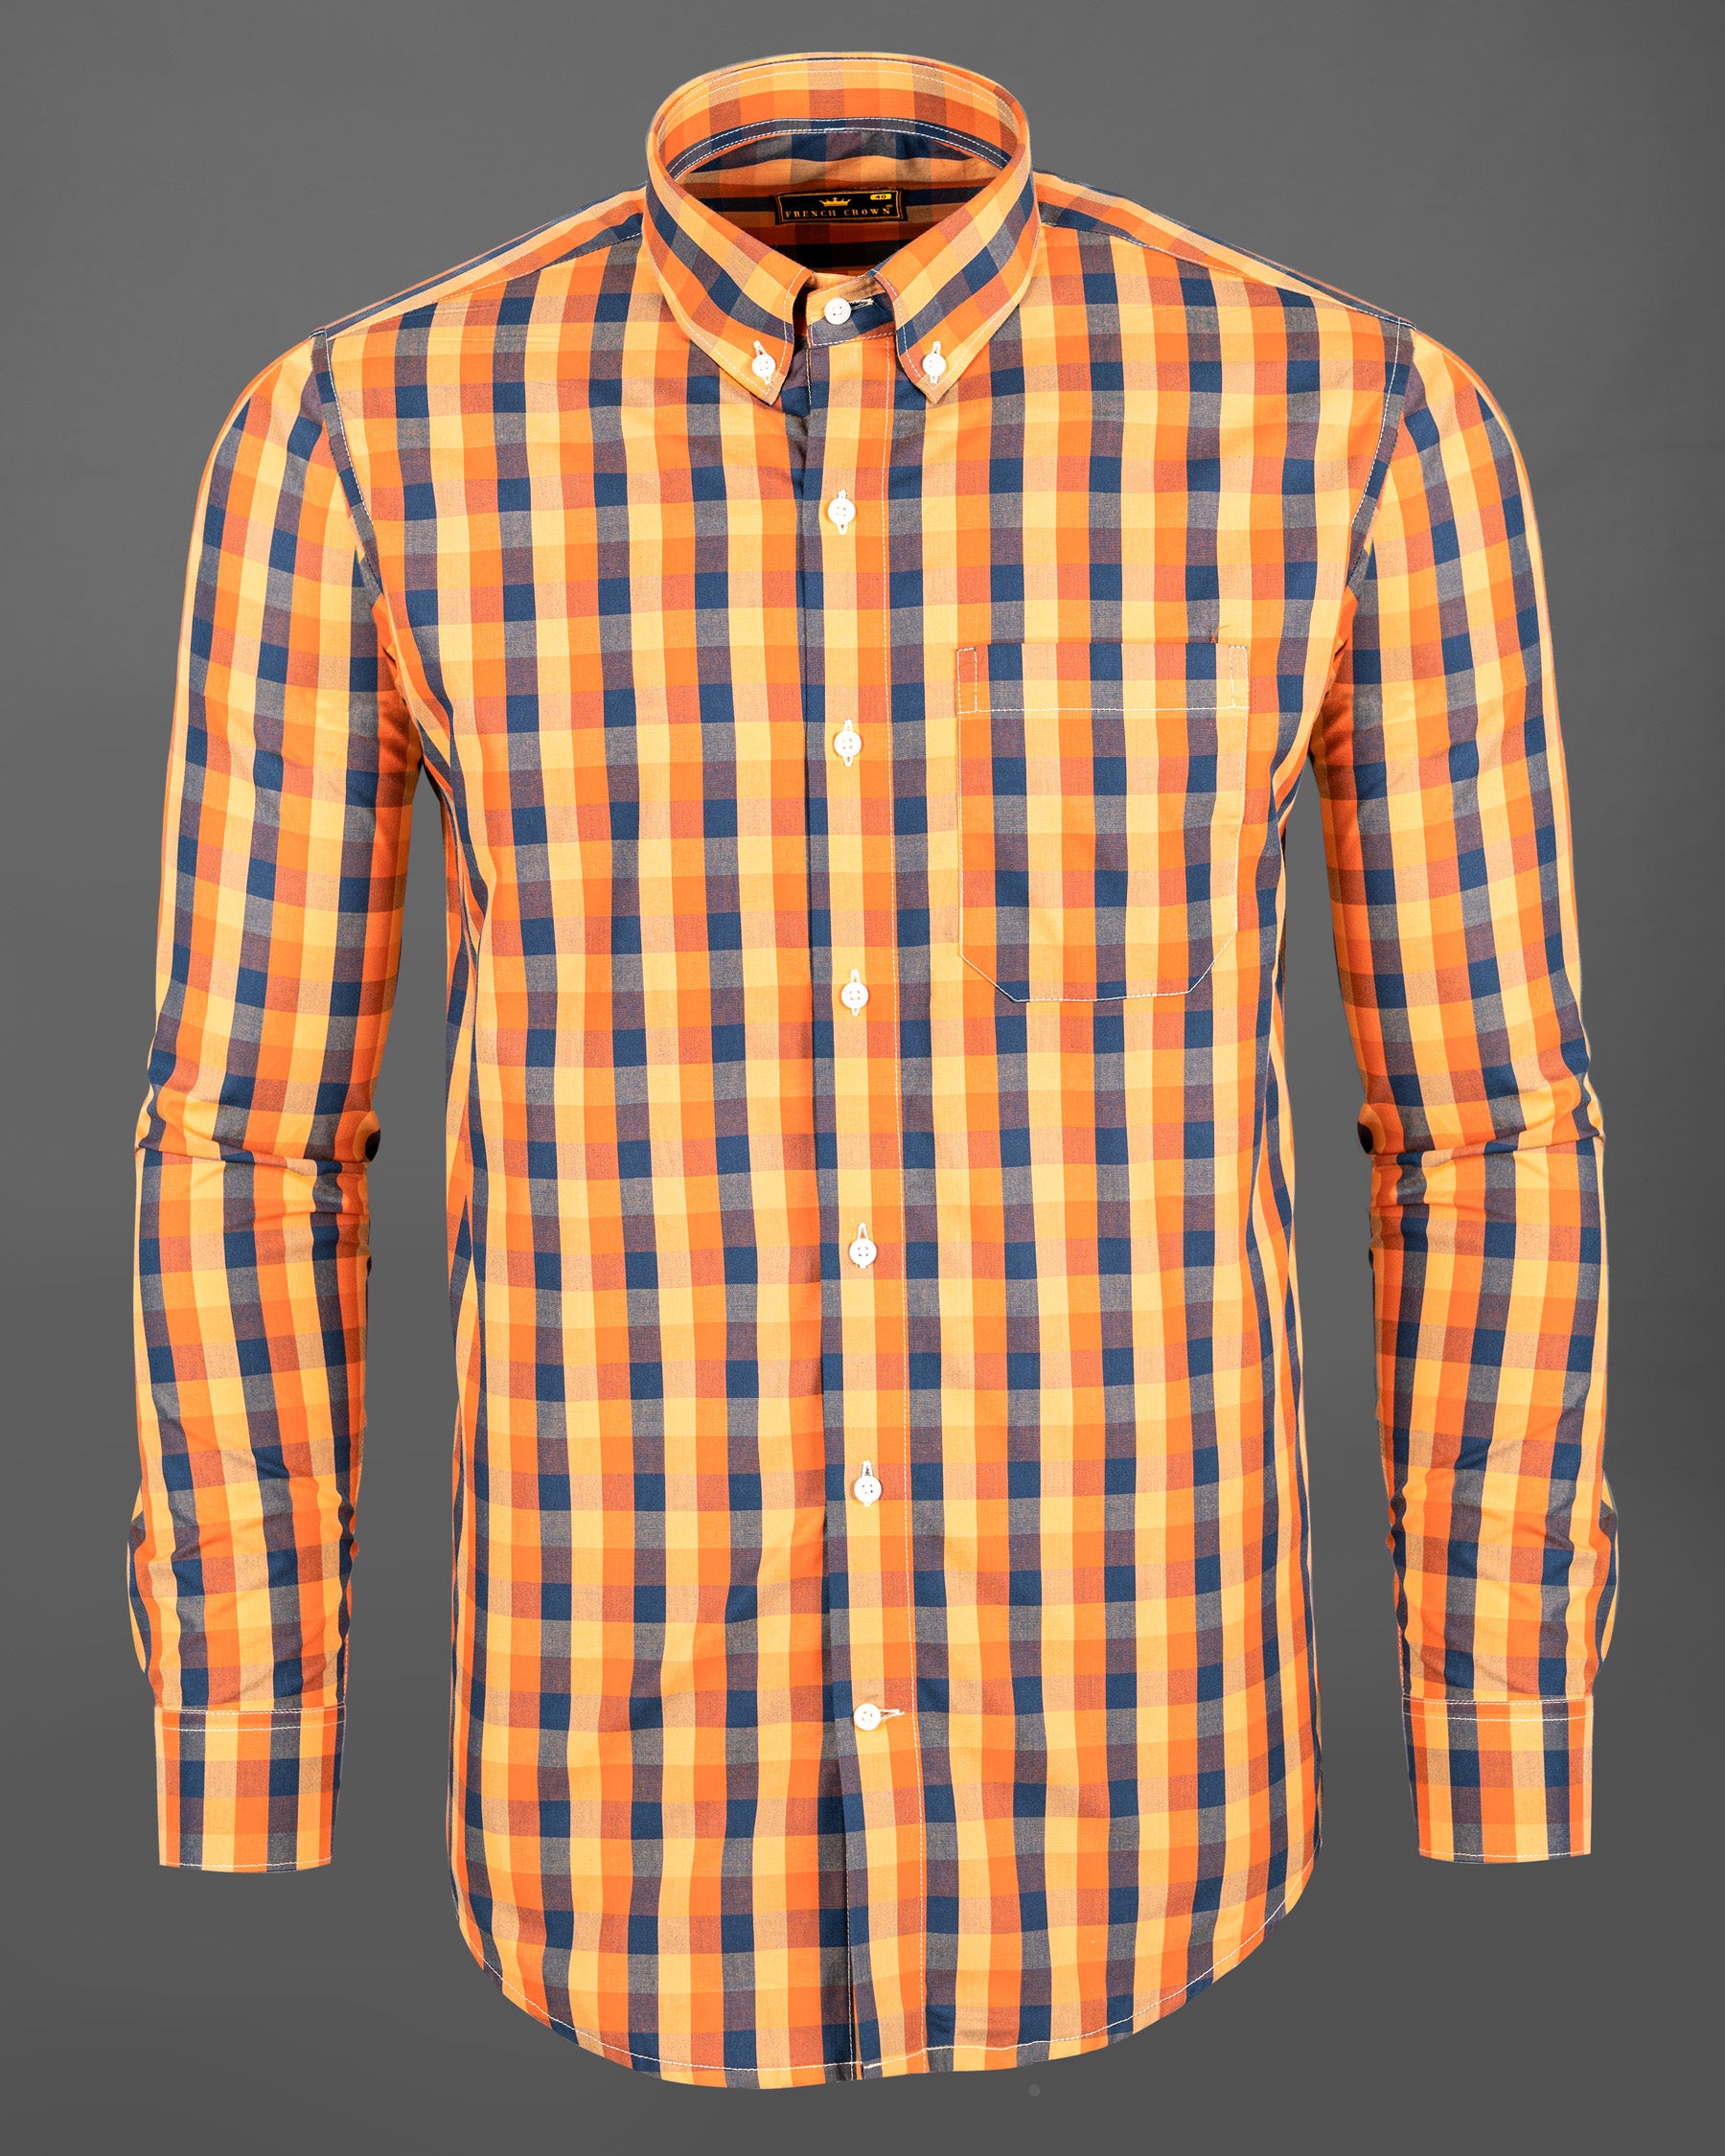 Tan Hide with Salomie and Blumine checked Premium Cotton Shirt 5089-BD-38, 5089-BD-H-38, 5089-BD-39, 5089-BD-H-39, 5089-BD-40, 5089-BD-H-40, 5089-BD-42, 5089-BD-H-42, 5089-BD-44, 5089-BD-H-44, 5089-BD-46, 5089-BD-H-46, 5089-BD-48, 5089-BD-H-48, 5089-BD-50, 5089-BD-H-50, 5089-BD-52, 5089-BD-H-52